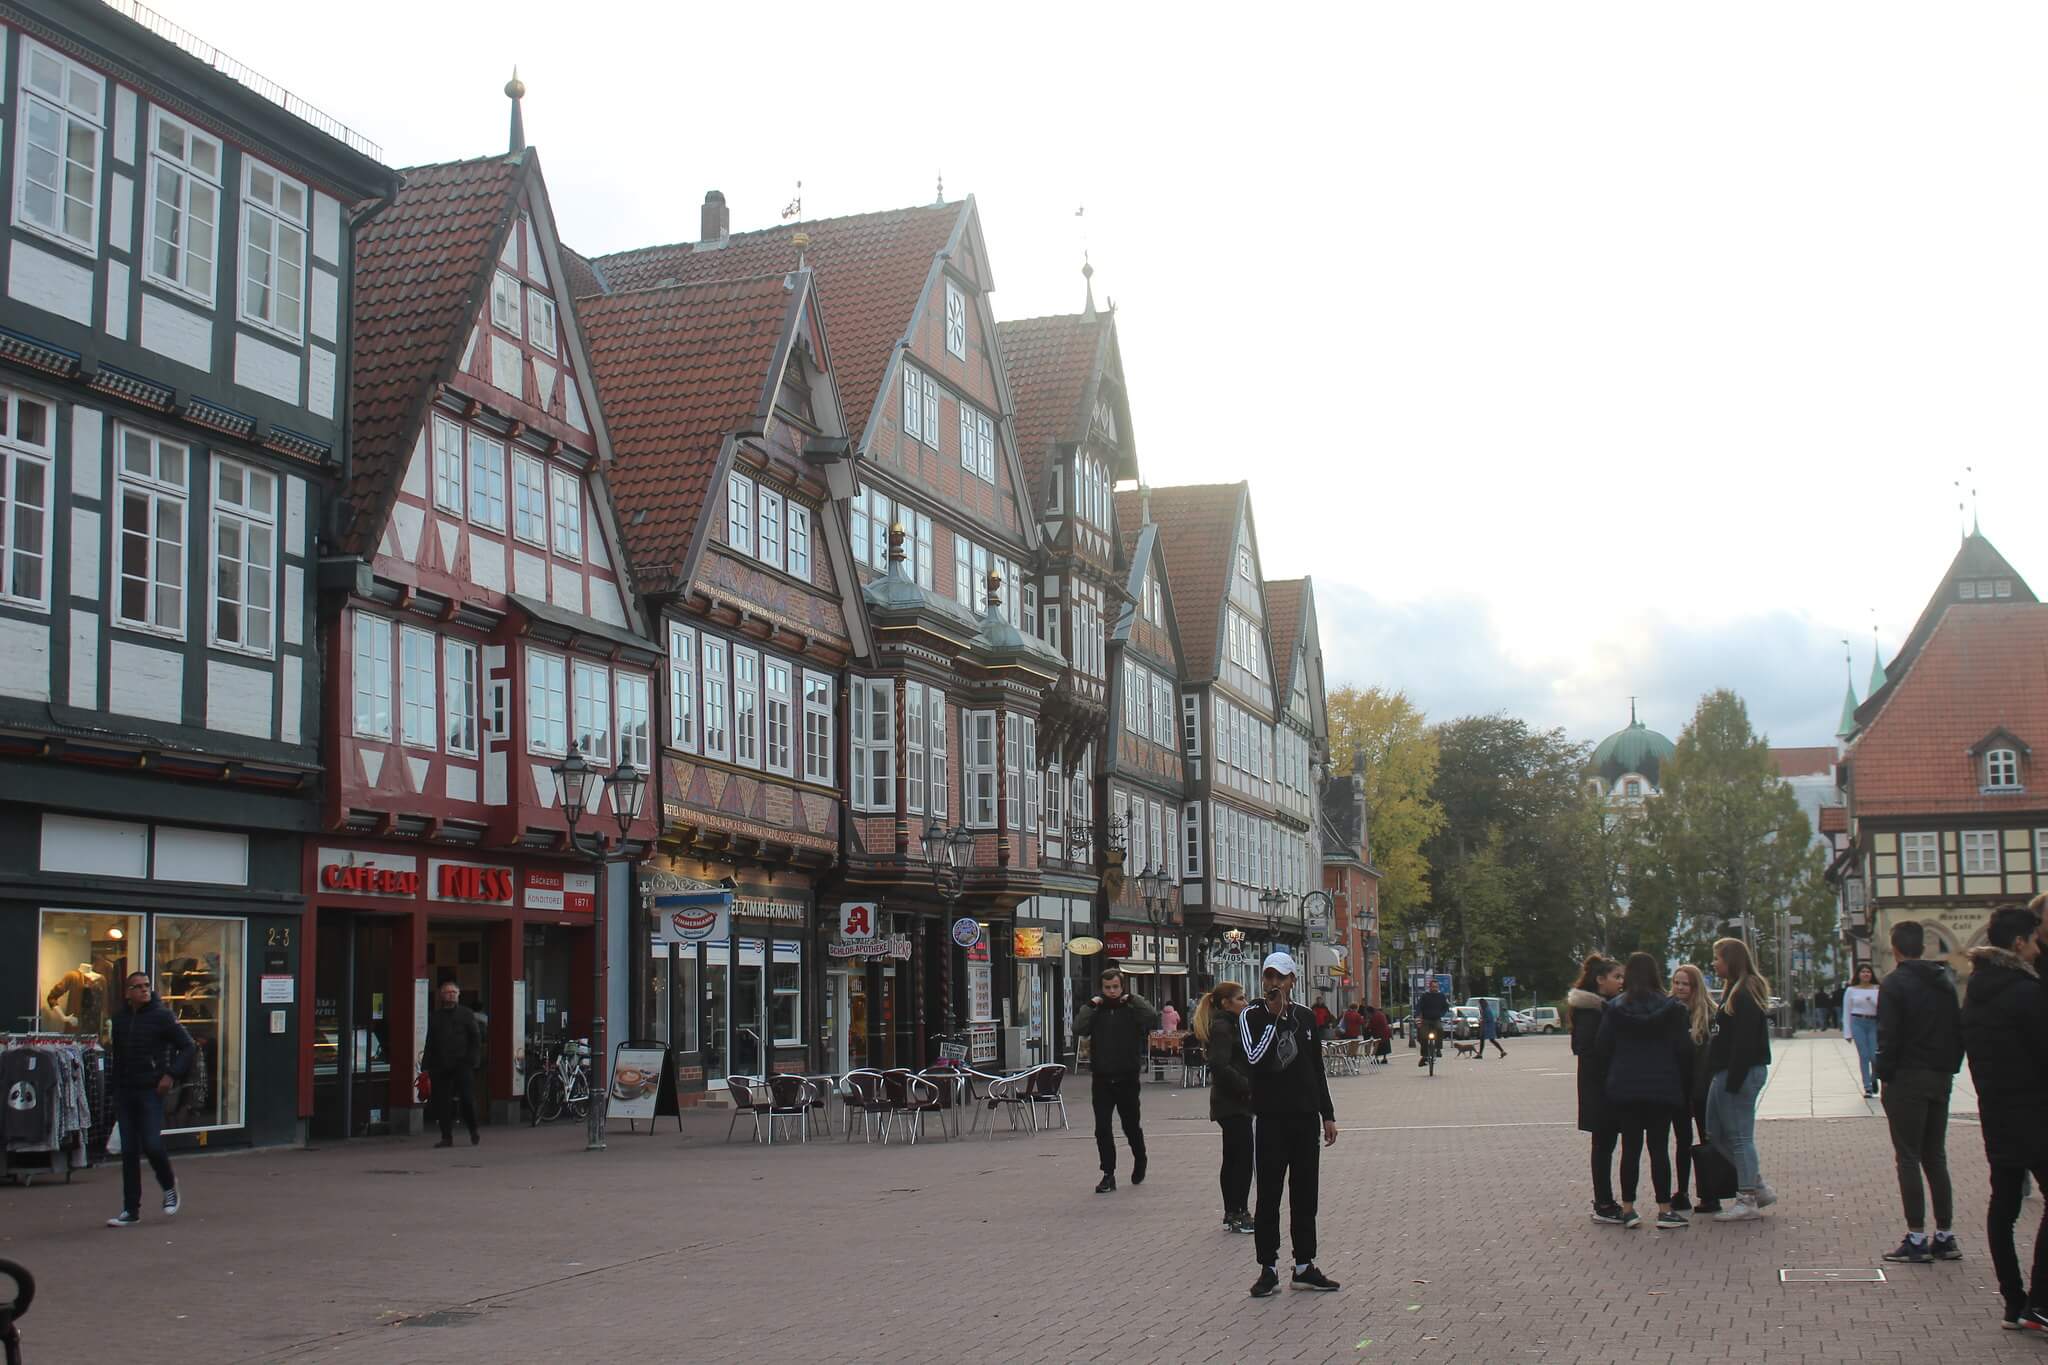 The old city center, Celle, Germany